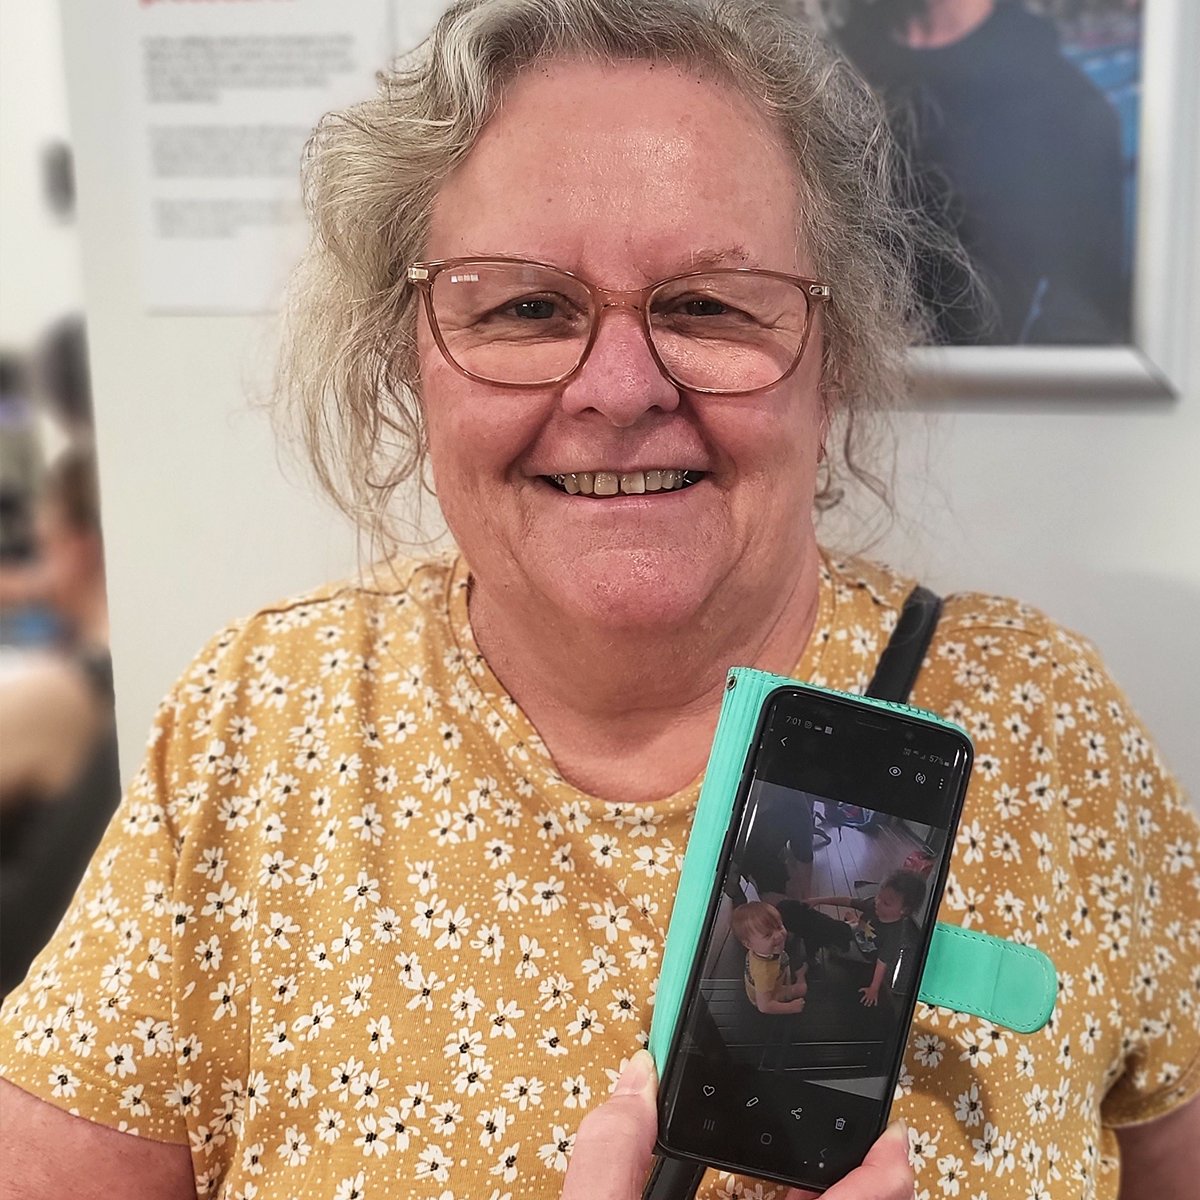 Nana Jenny donates blood as part of her Lifeblood Team 'The Stannard Boys', to help people like her daughter Miriam and grandsons who've collectively received over 100 blood transfusions. Creating a Team meant Jenny could support her family in need. #lifebloodau